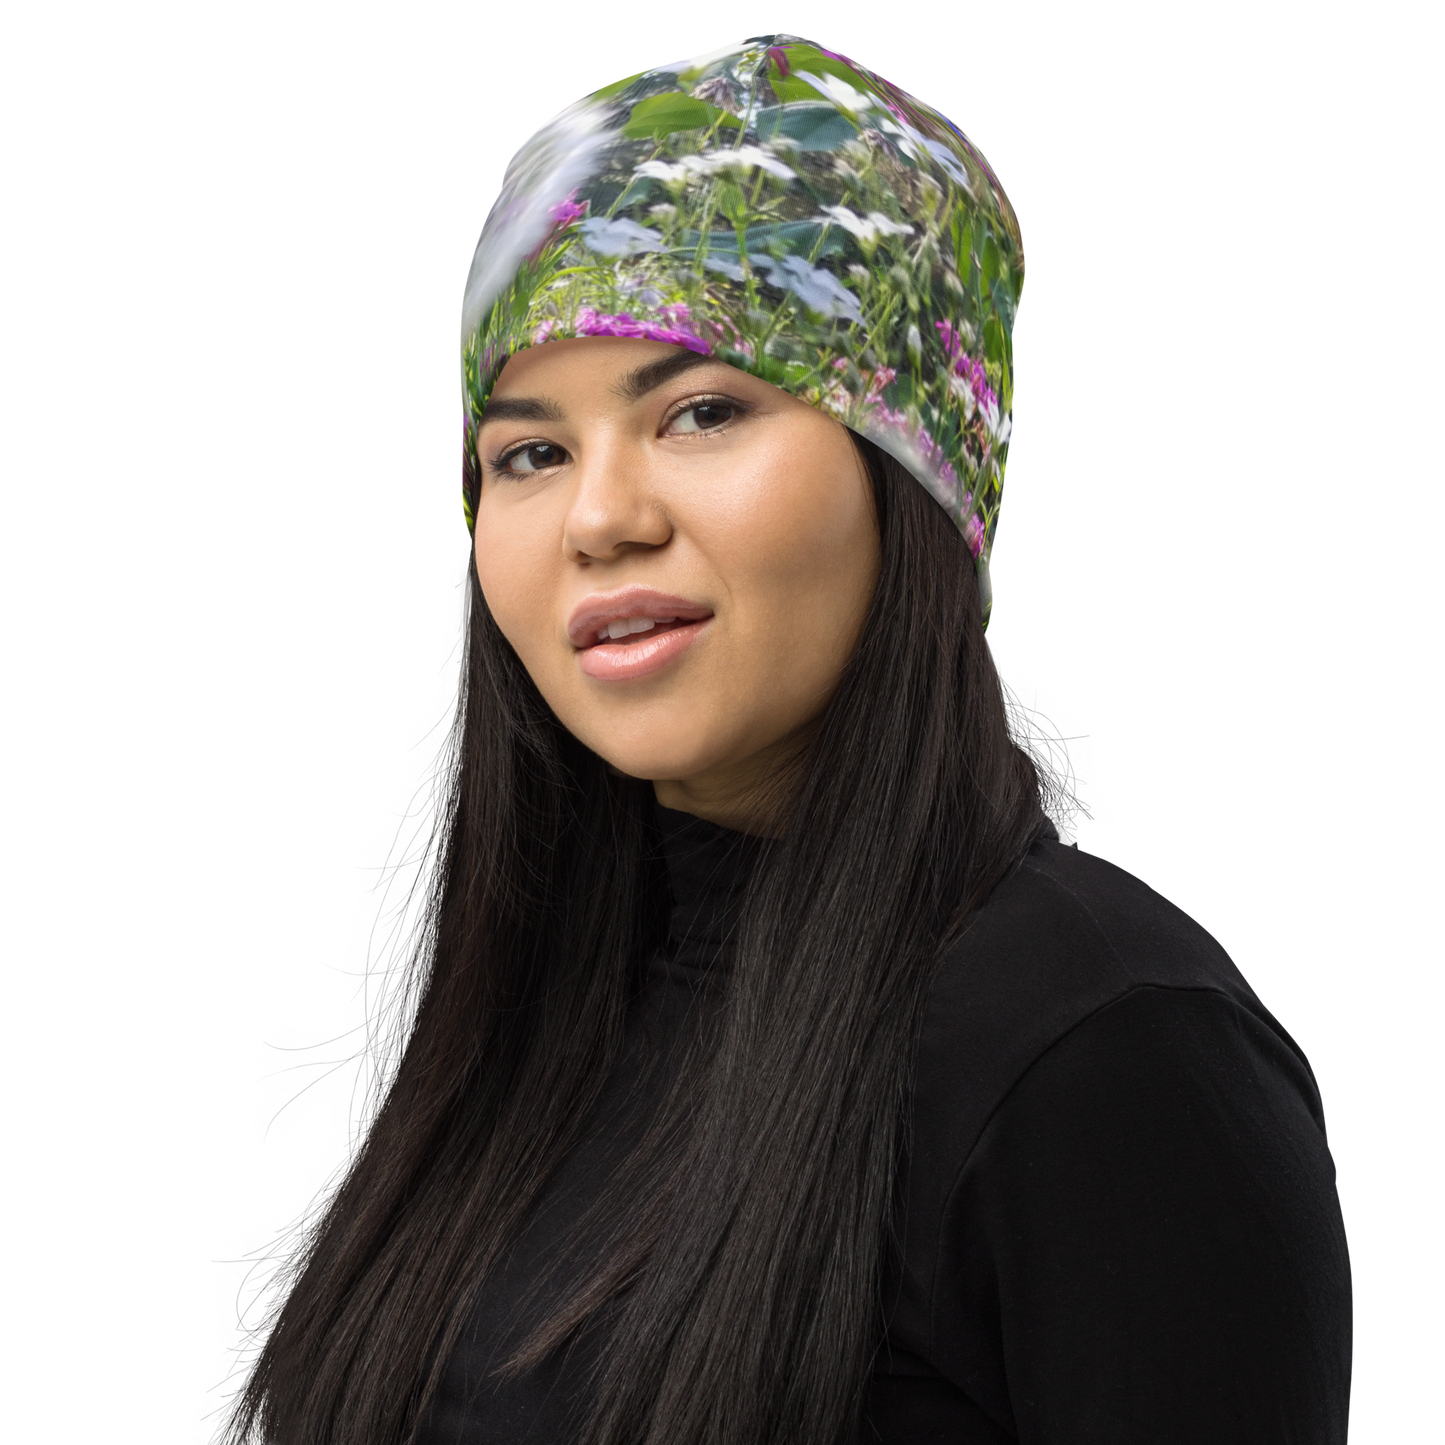 The FLOWER LOVE Collection - "Dreamy Dandelions" Design Beanie - Lightweight, Cute Chemo Hat